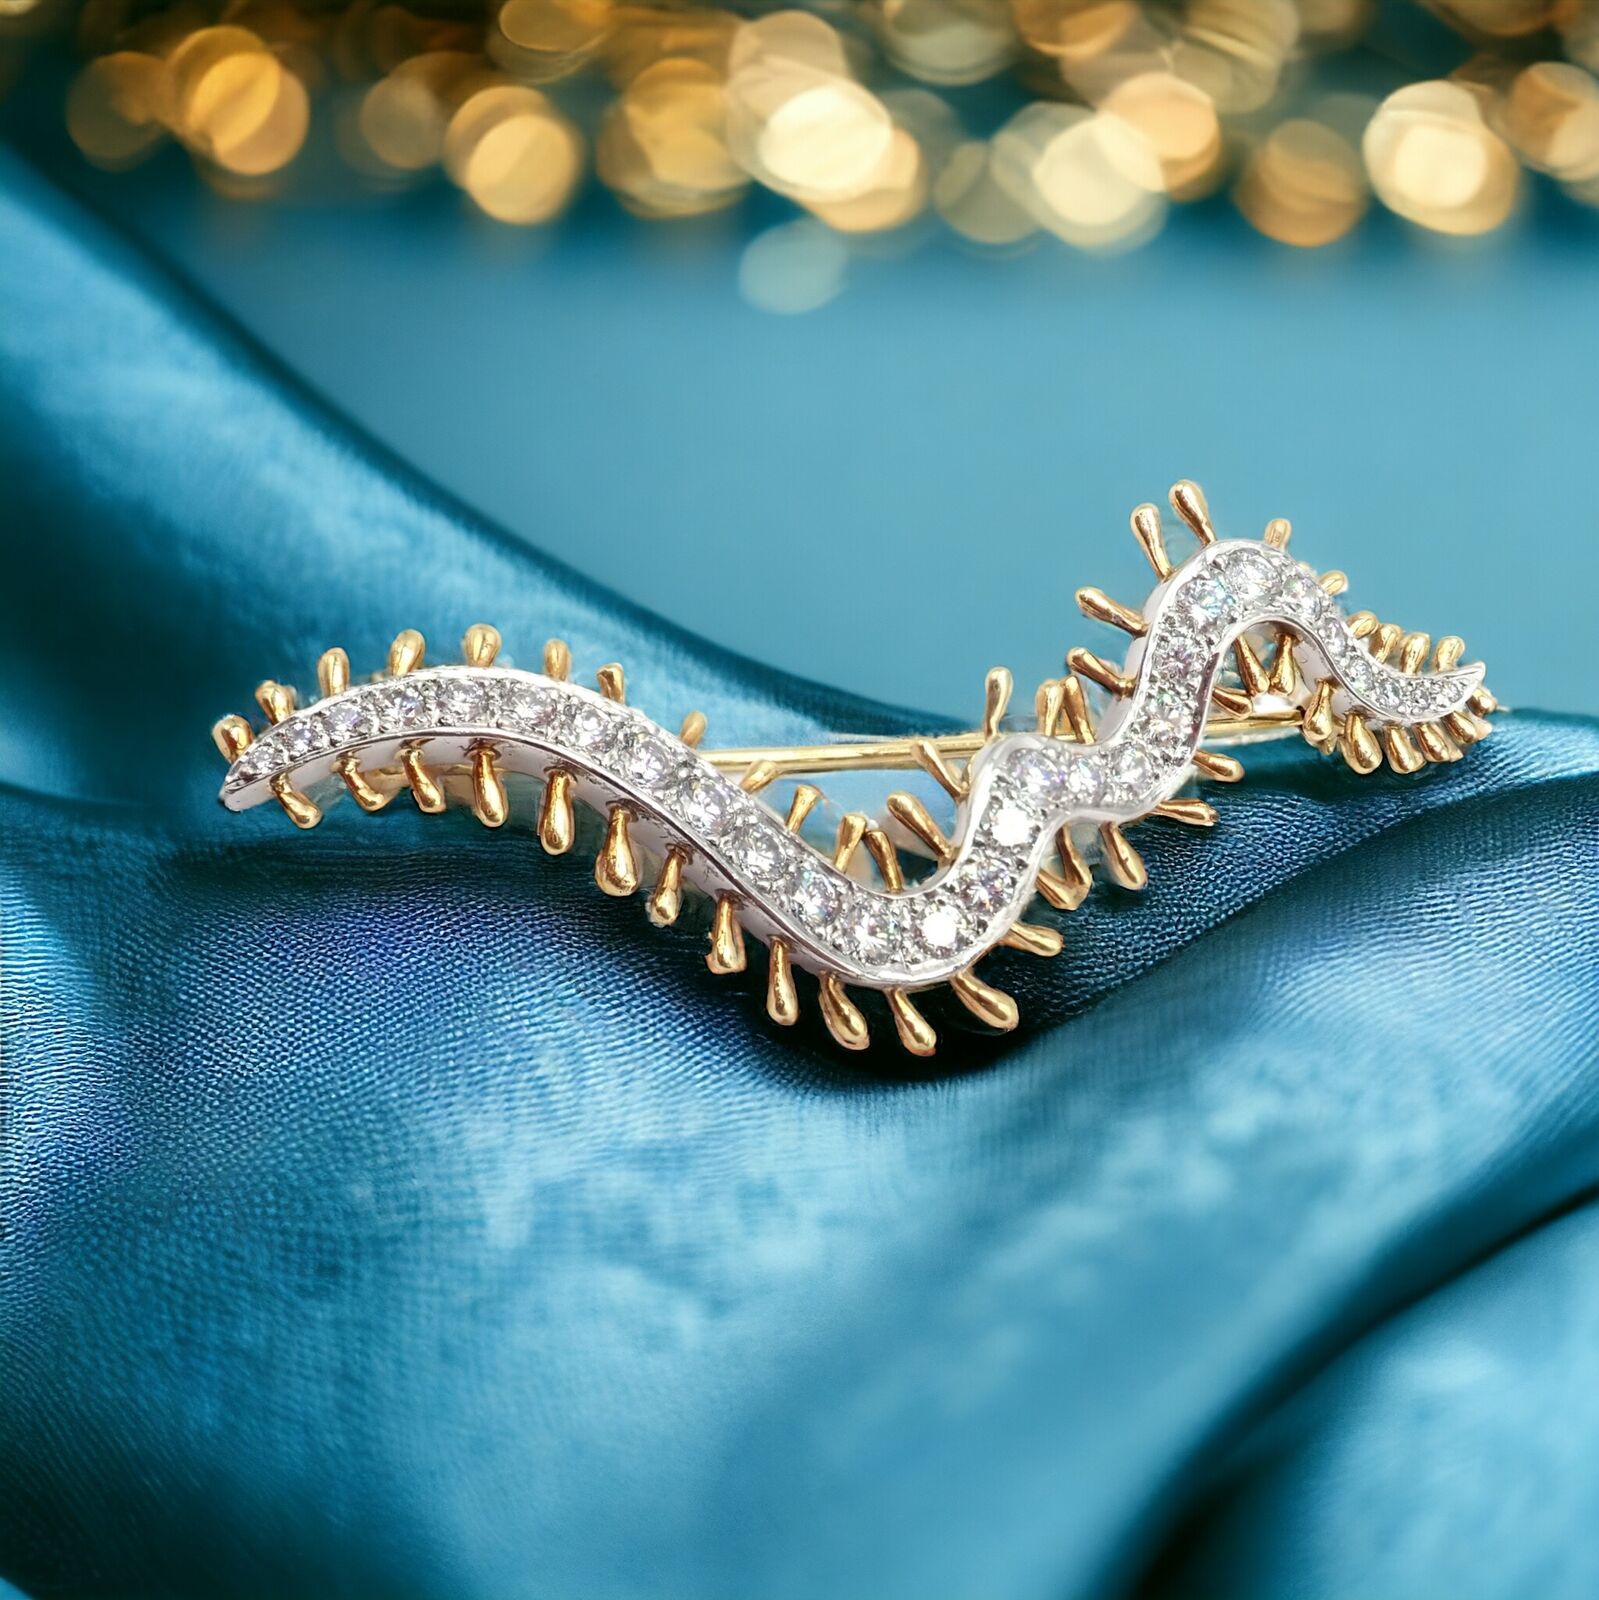 Tiffany & Co. Jewelry & Watches:Fine Jewelry:Brooches & Pins Vintage Tiffany & Co. Platinum 18k Yellow Gold Diamond Centipede Pin Brooch 1988